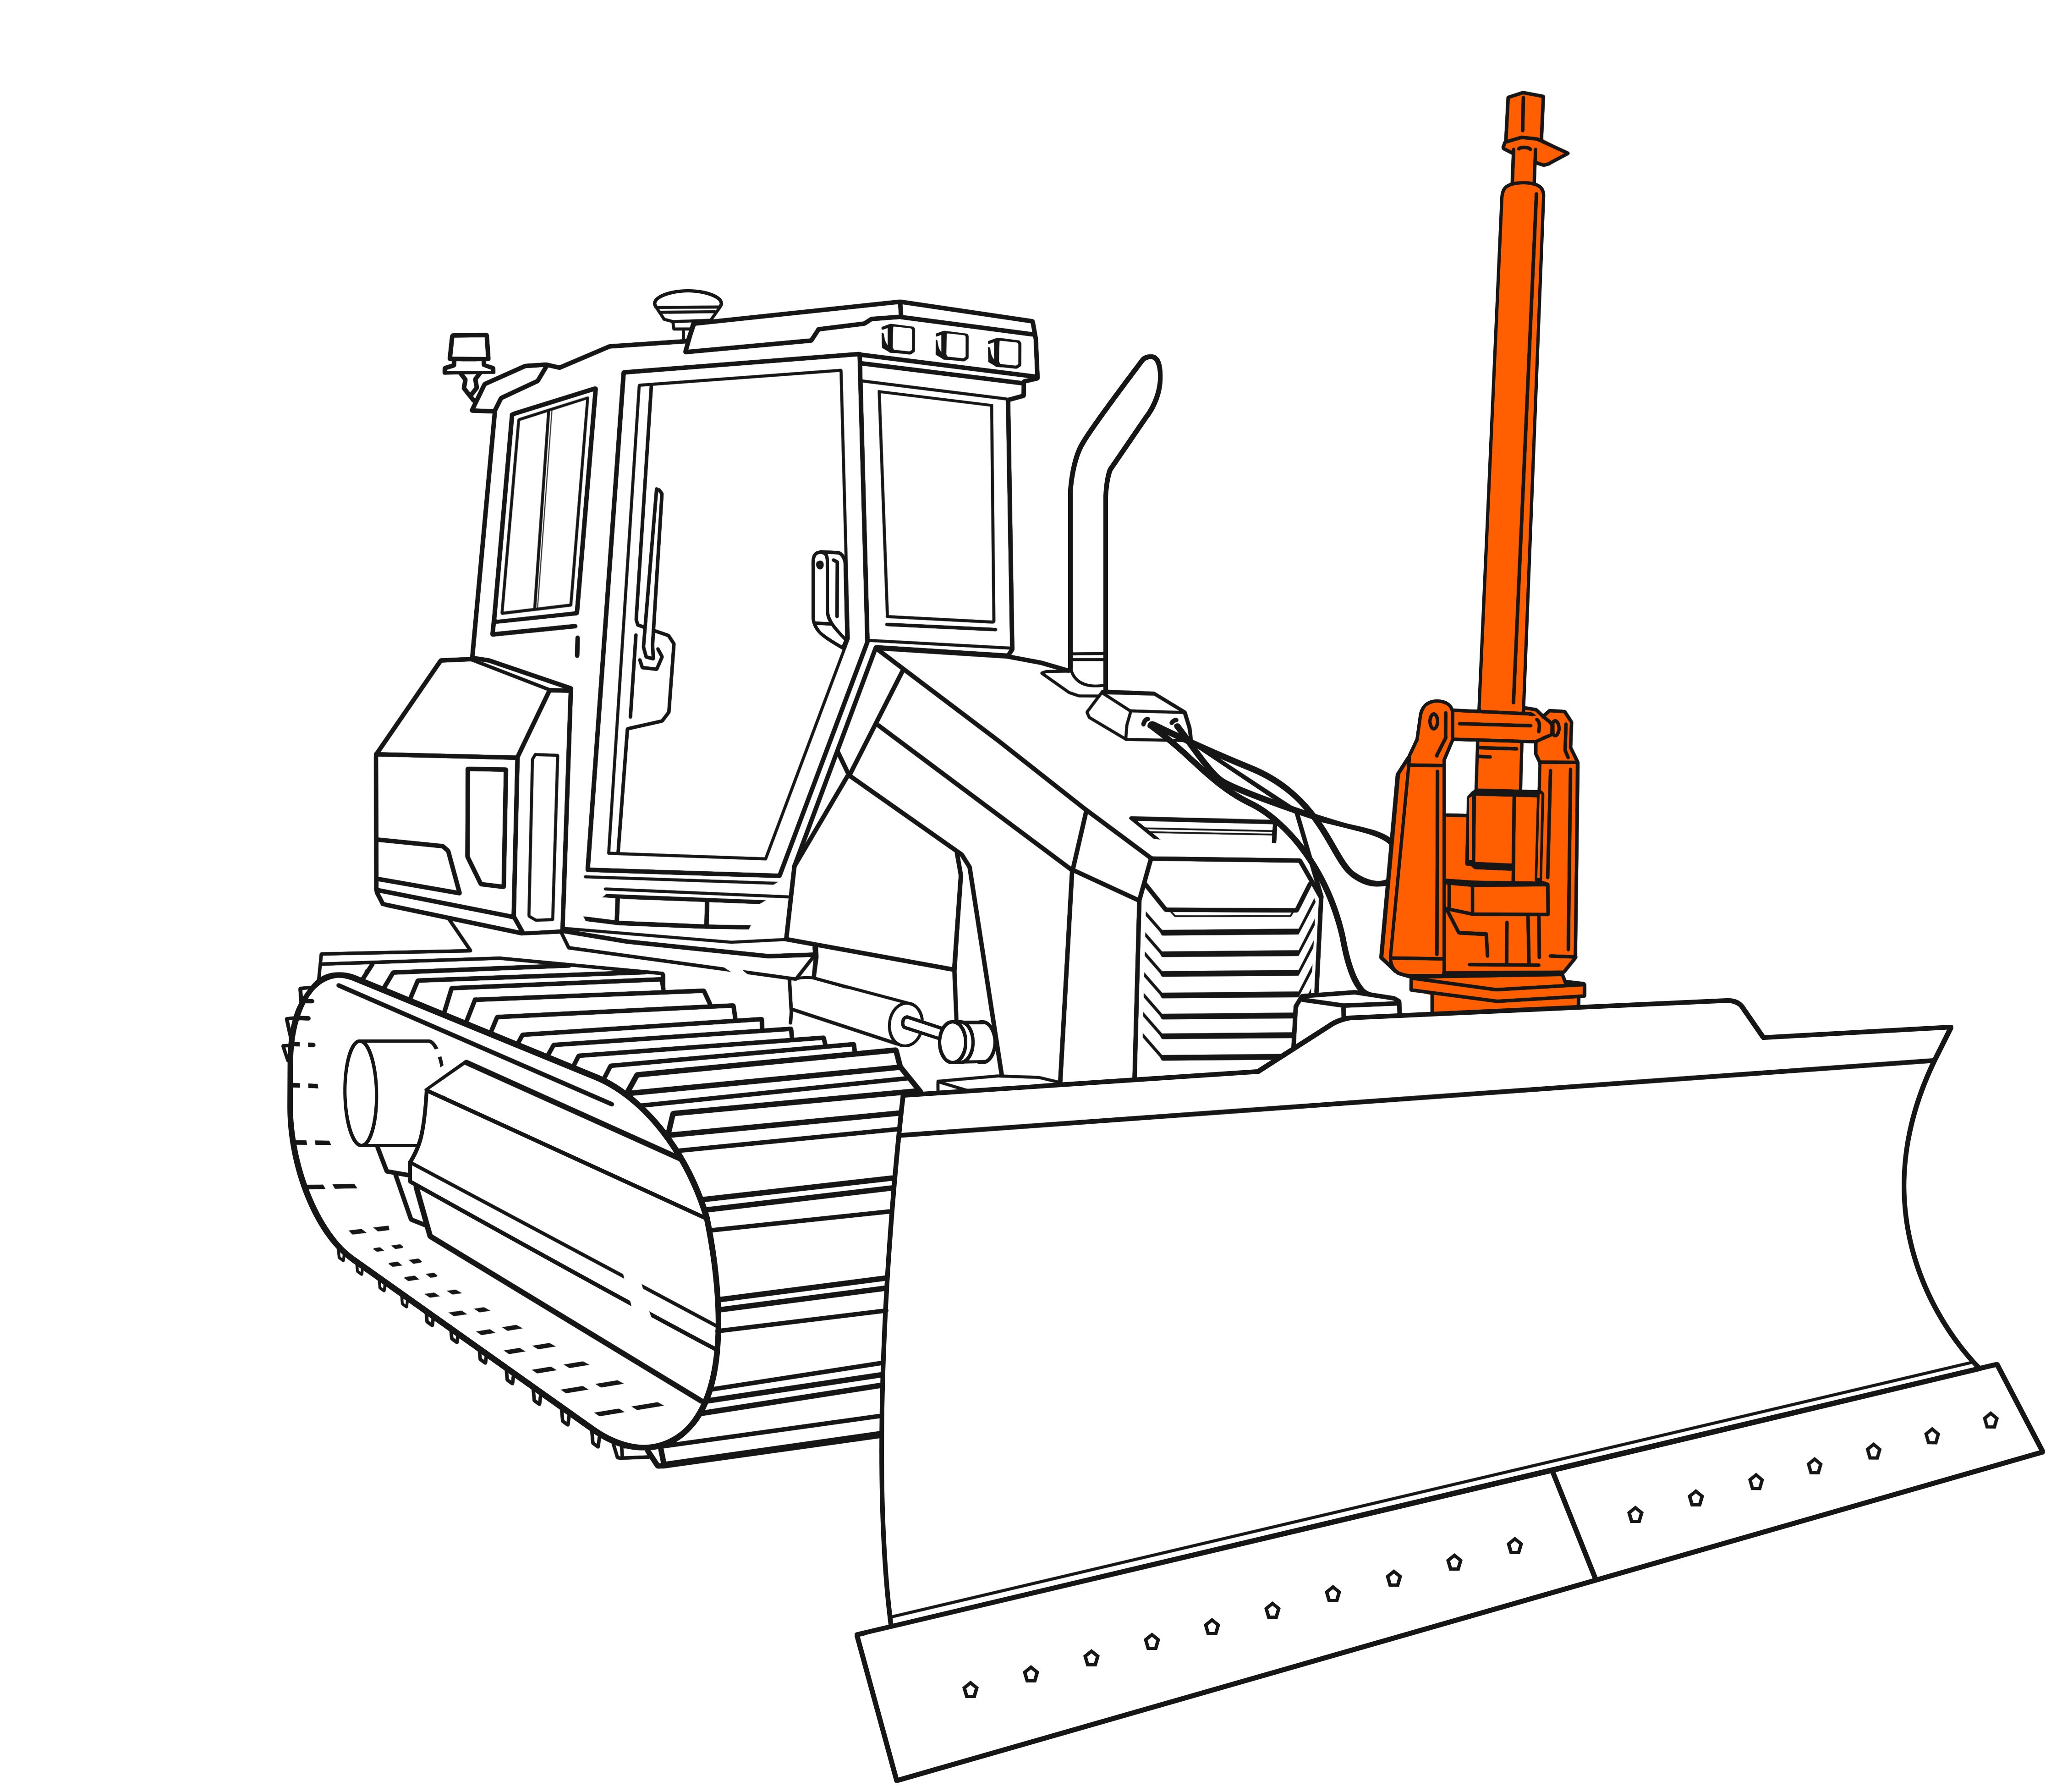 A DEVELON DD100 dozer outfitted with the optional 3D grade control system.